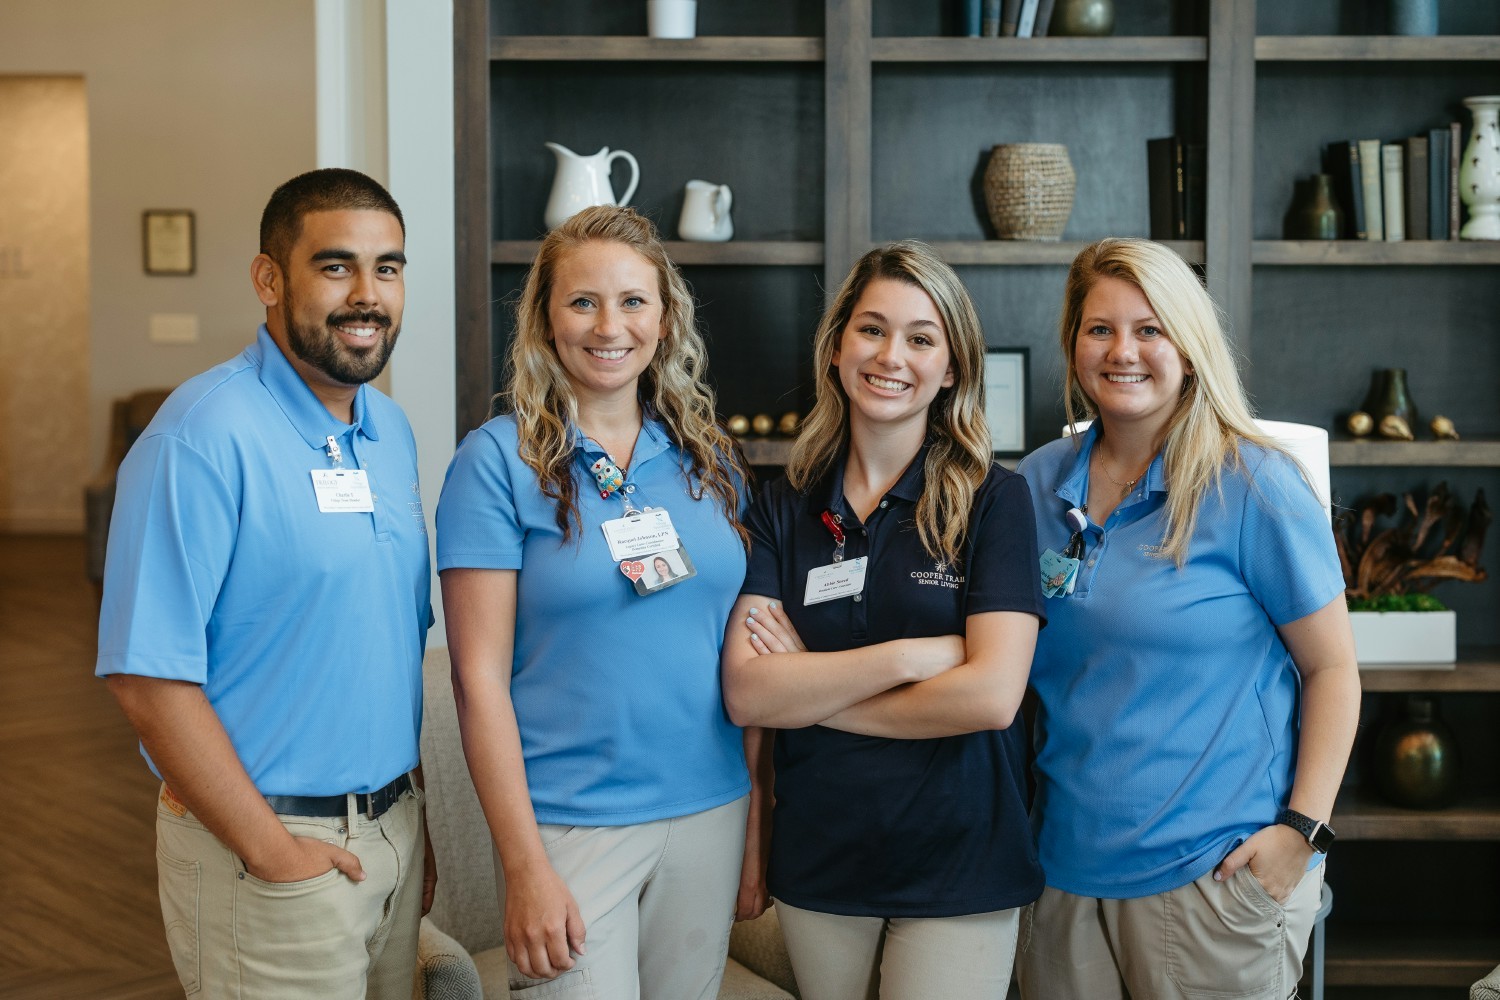 Trilogy Health Services strives to be the best place our employees have ever belonged.